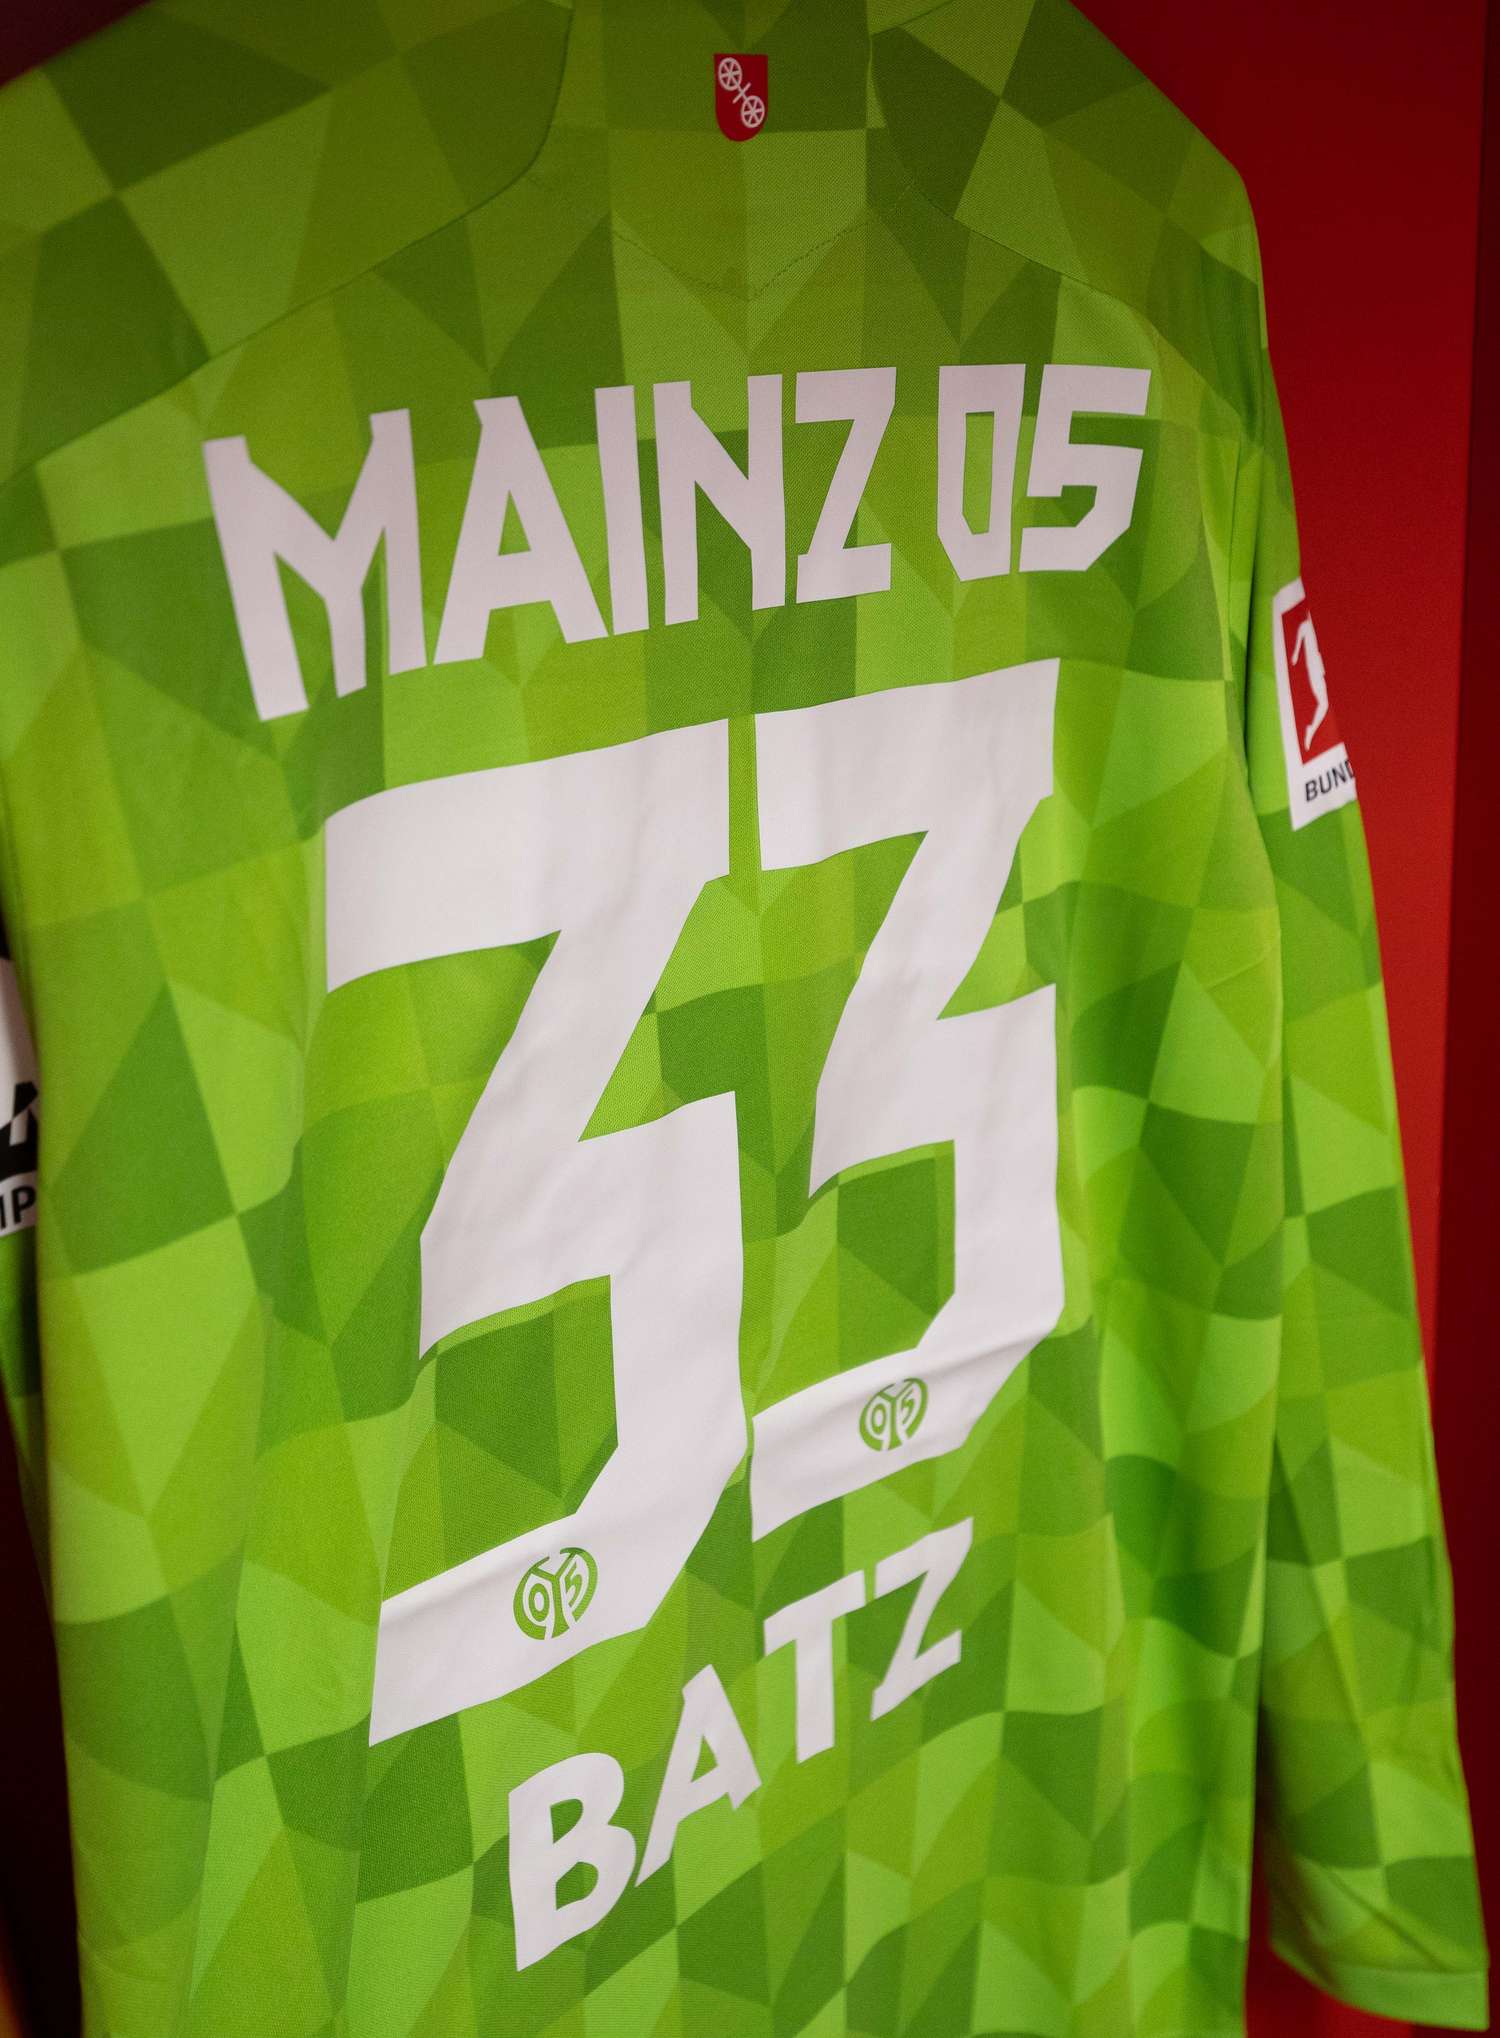 1. FSV Mainz 05 - Comfortable victory in second friendly